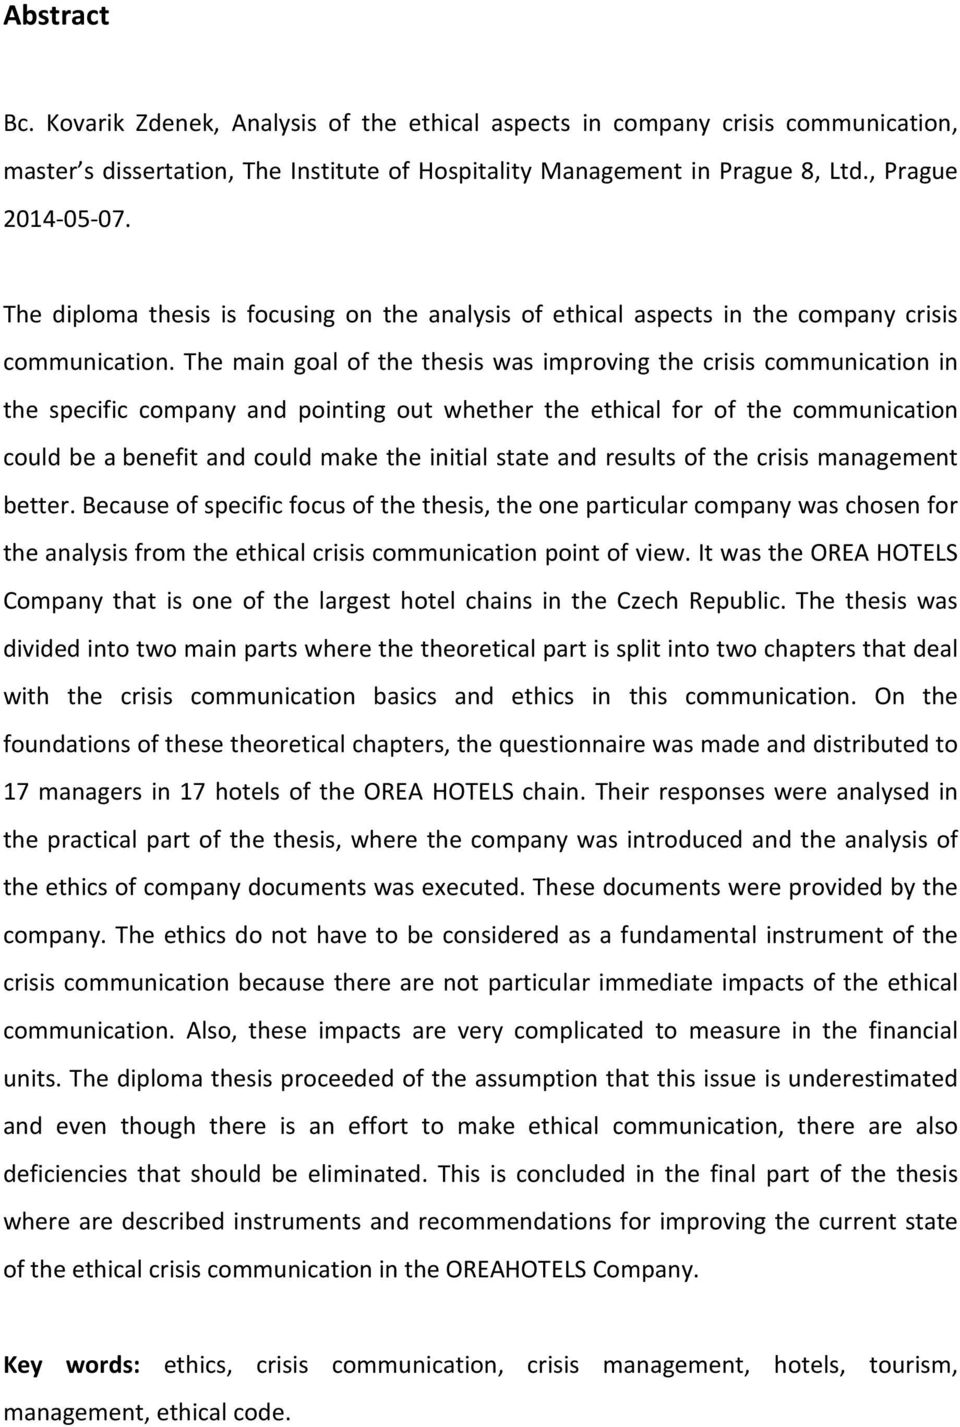 The main goal of the thesis was improving the crisis communication in the specific company and pointing out whether the ethical for of the communication could be a benefit and could make the initial